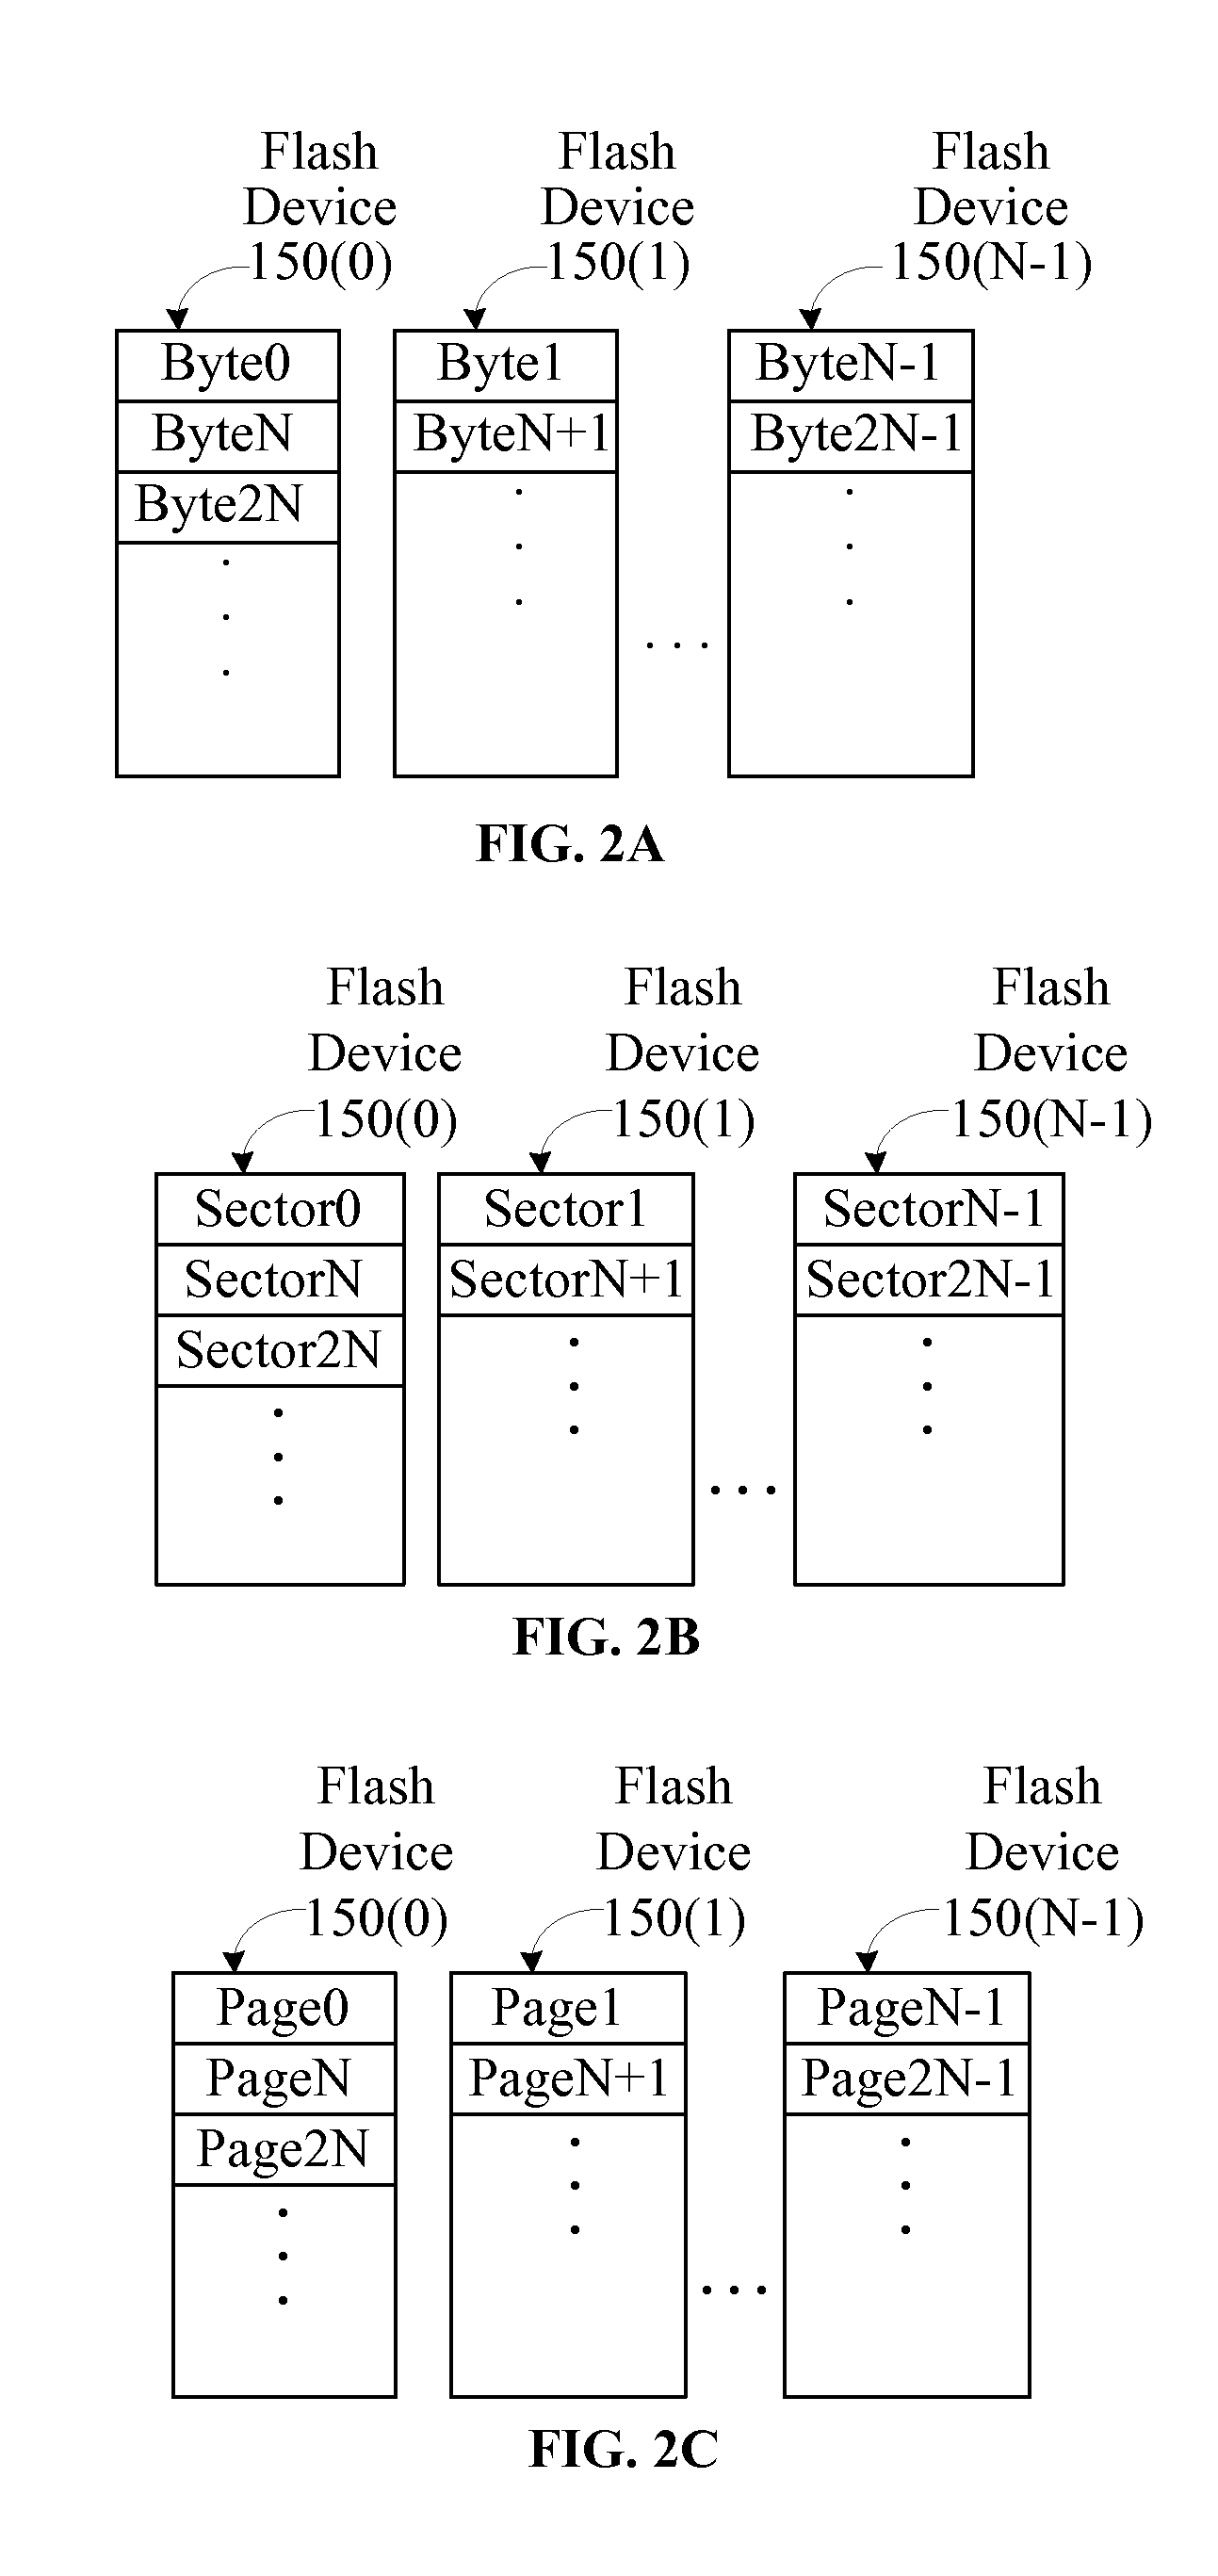 Flash devices with raid